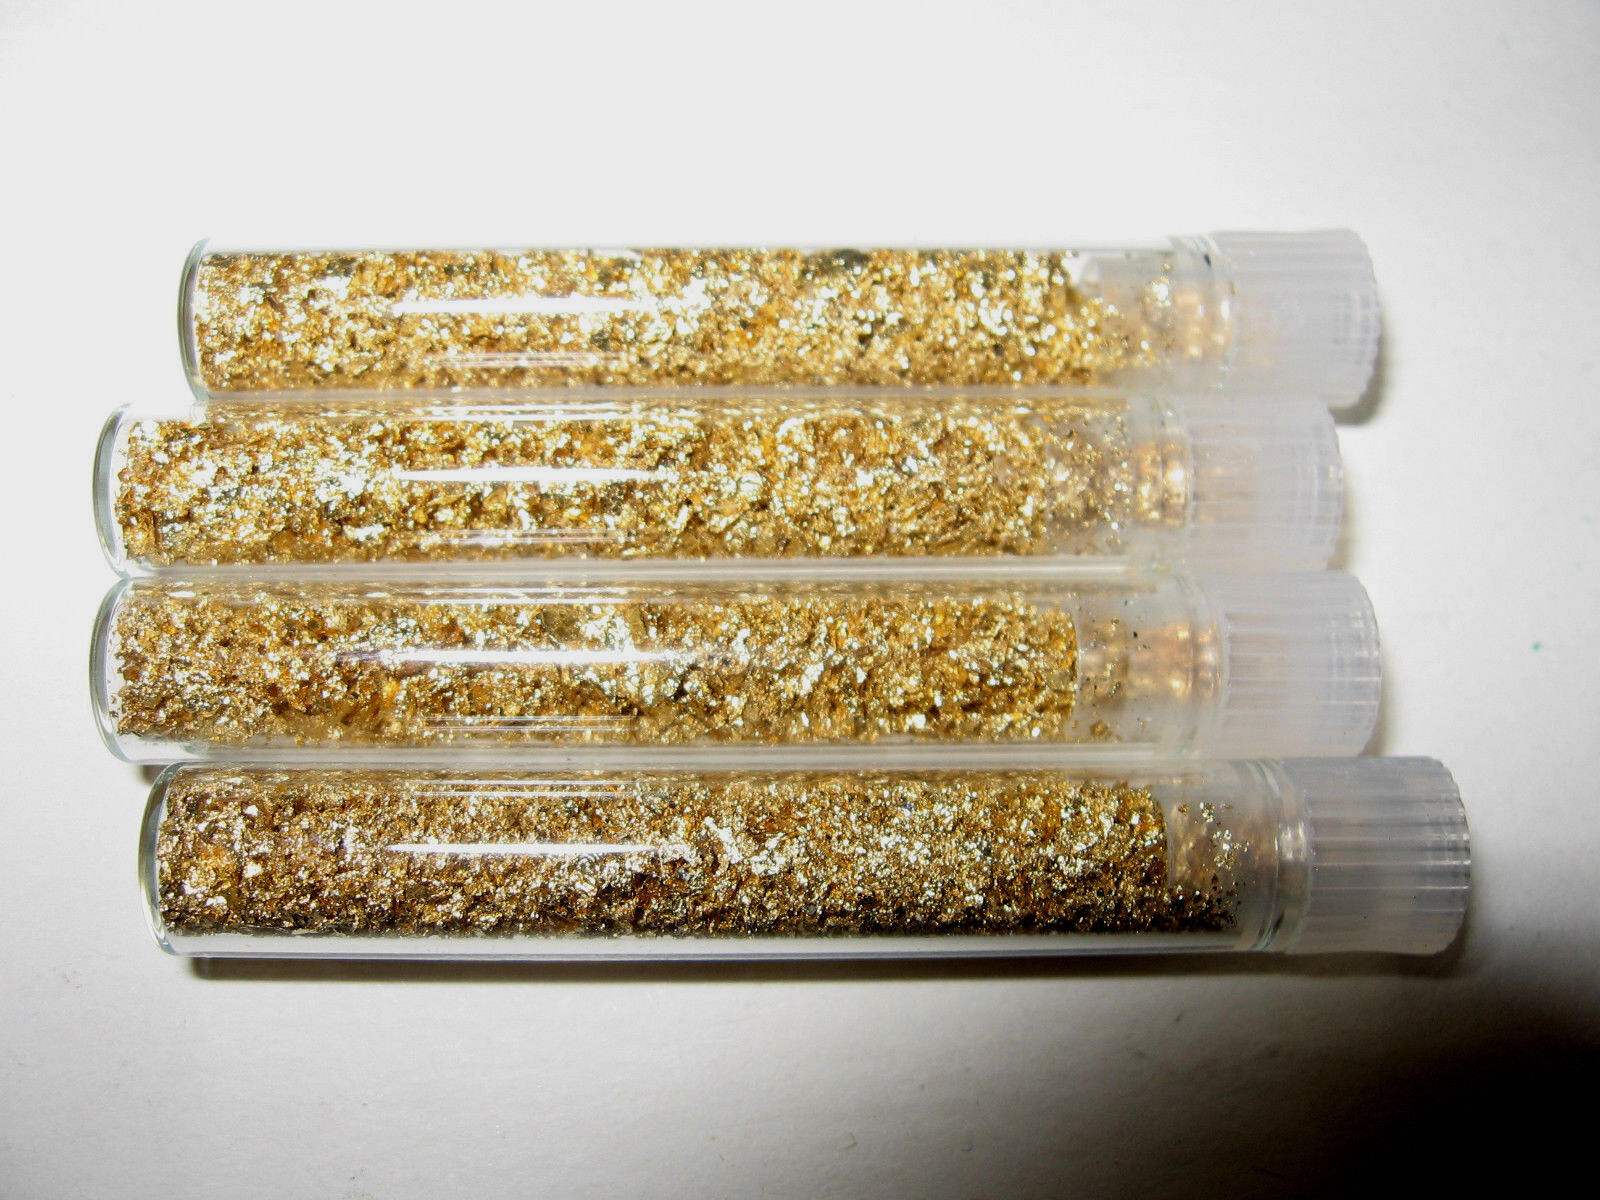 Lot of 4 GOLD LEAF FLAKES in GLASS VIALS